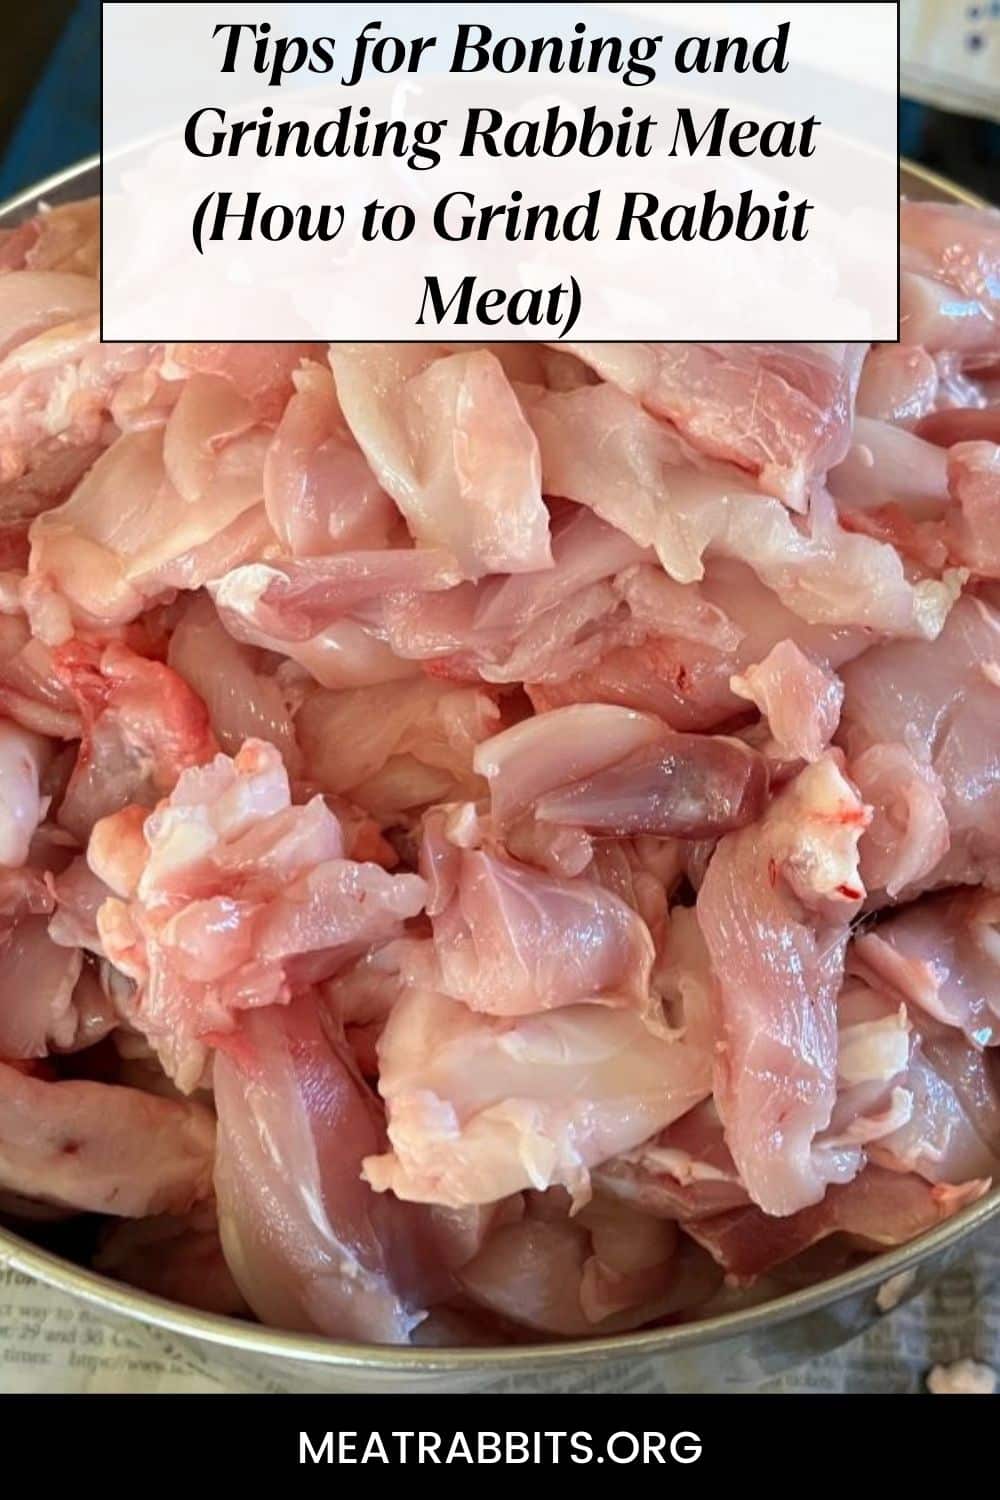 Tips for Boning and Grinding Rabbit Meat (How to Grind Rabbit Meat) pinterest image.